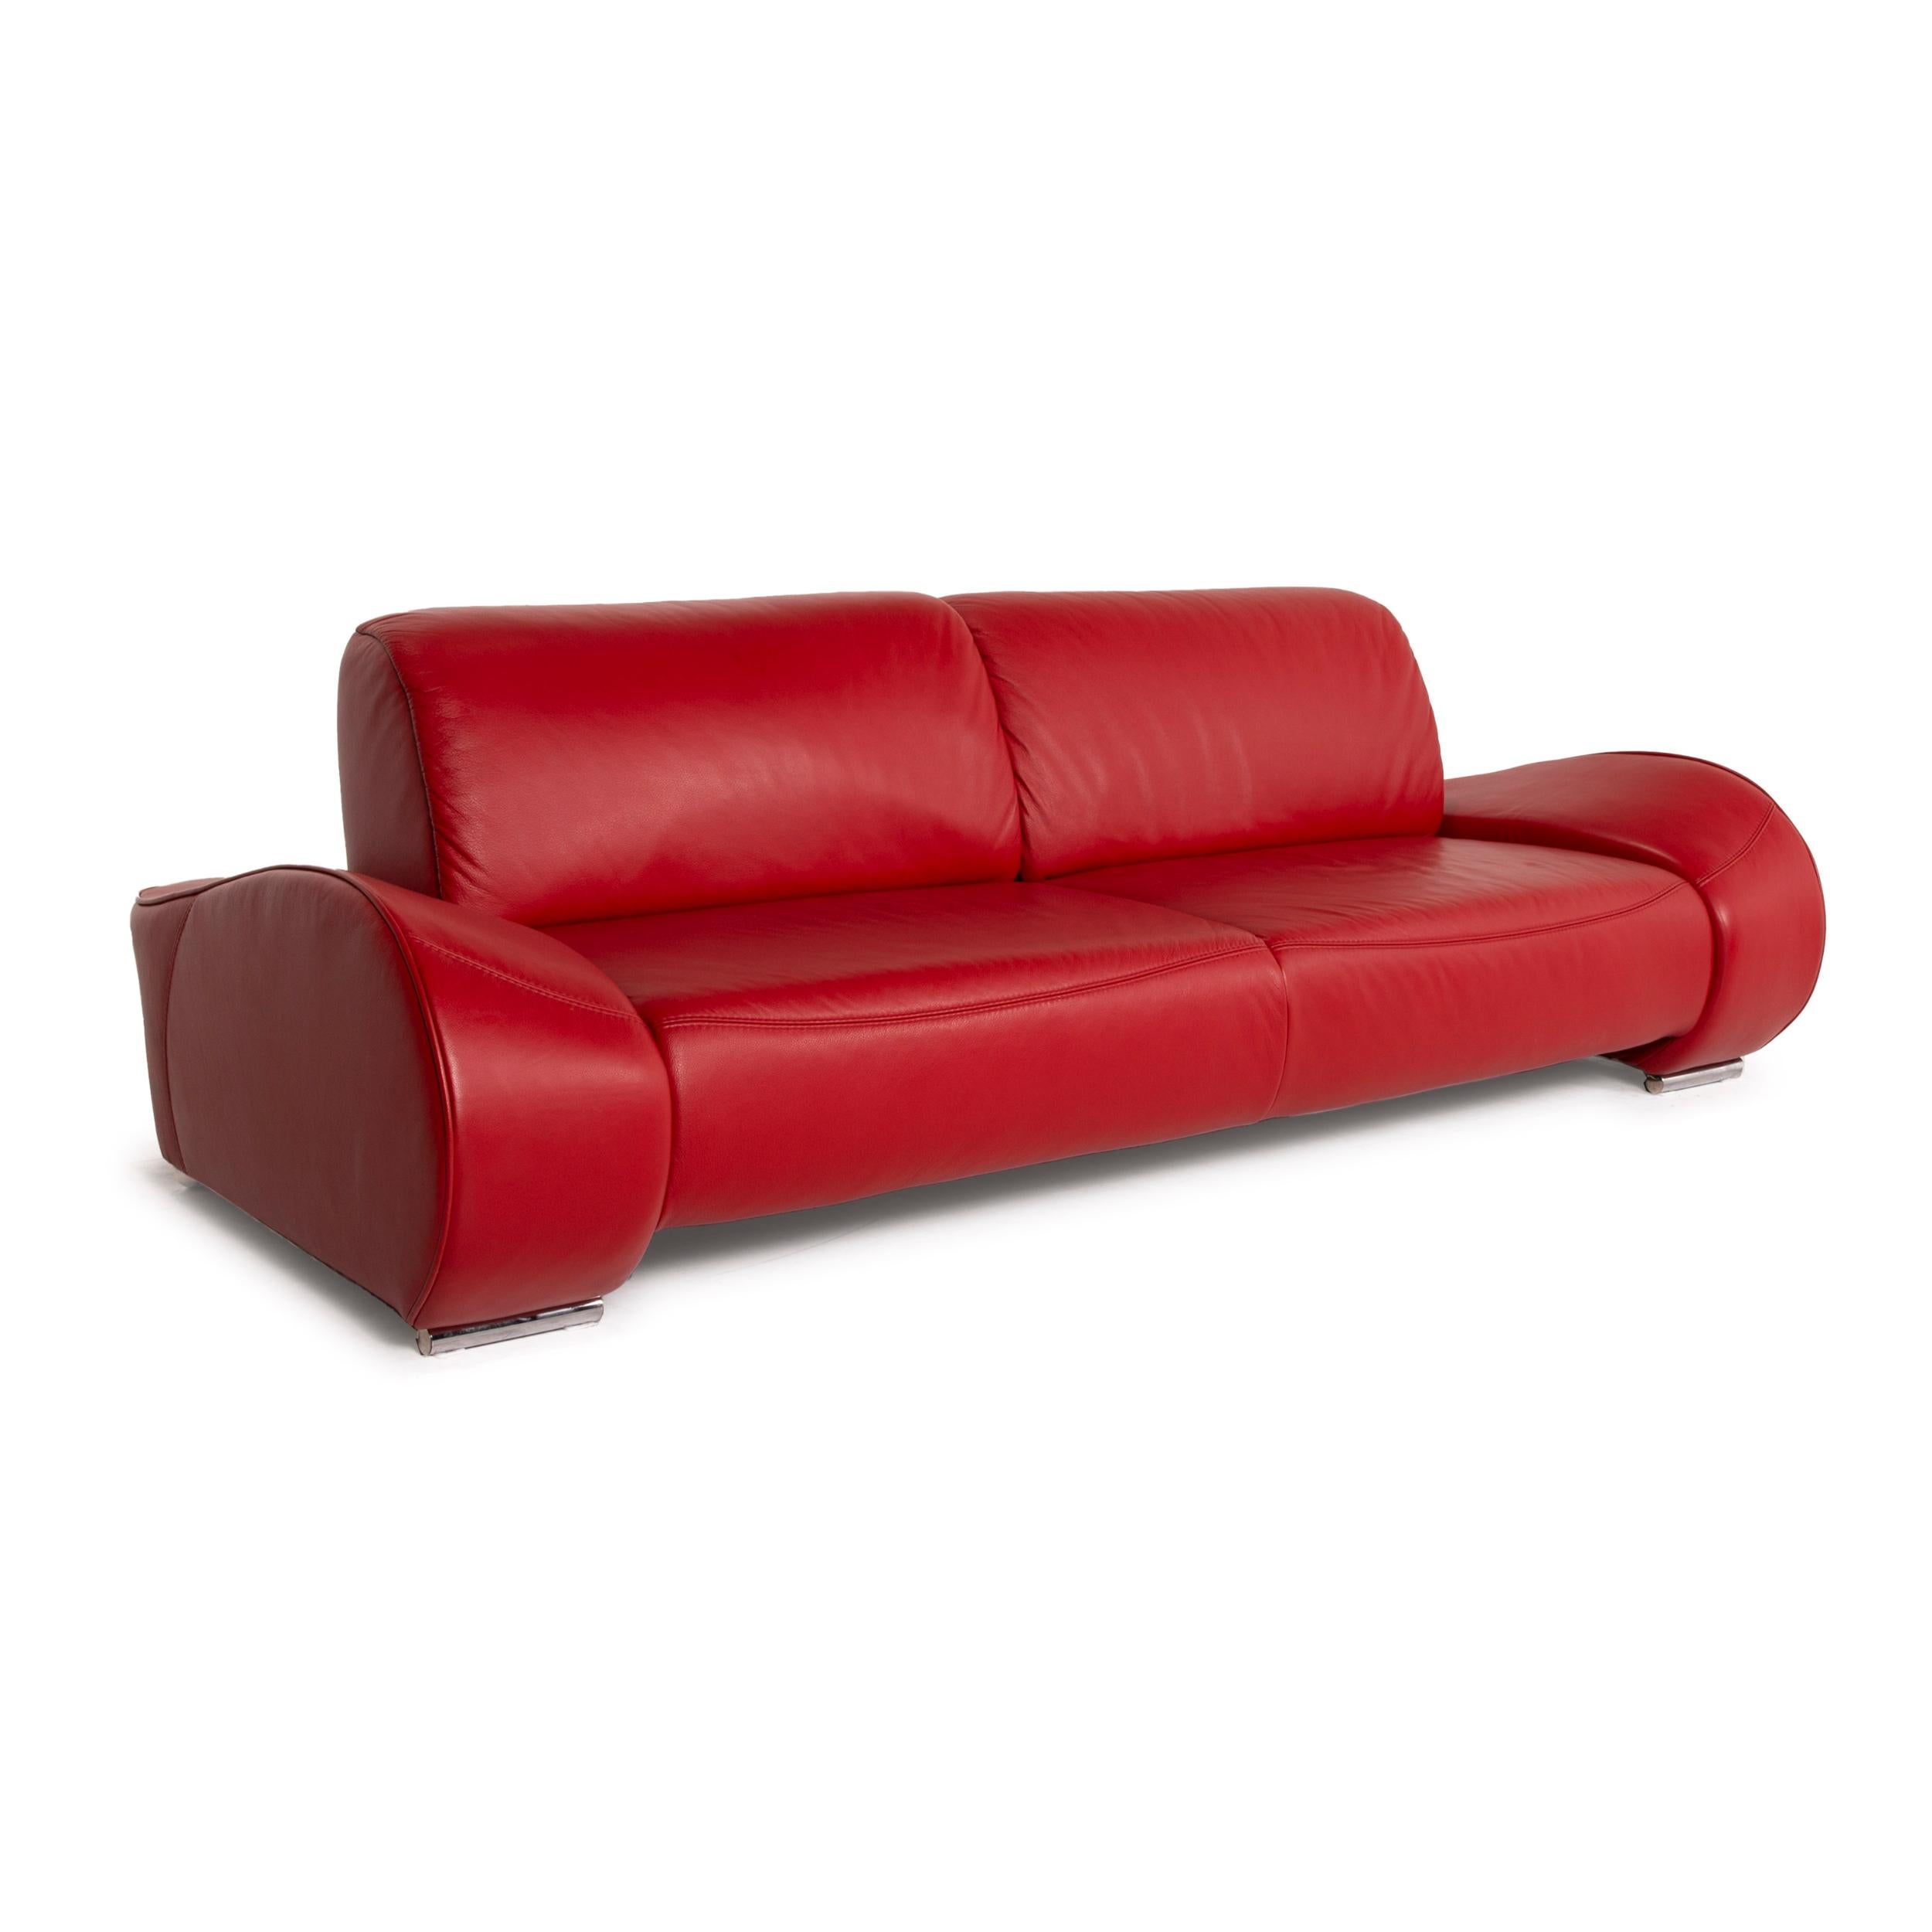 Musterring Mr-740 Leather Sofa Red Three-Seater Function 3